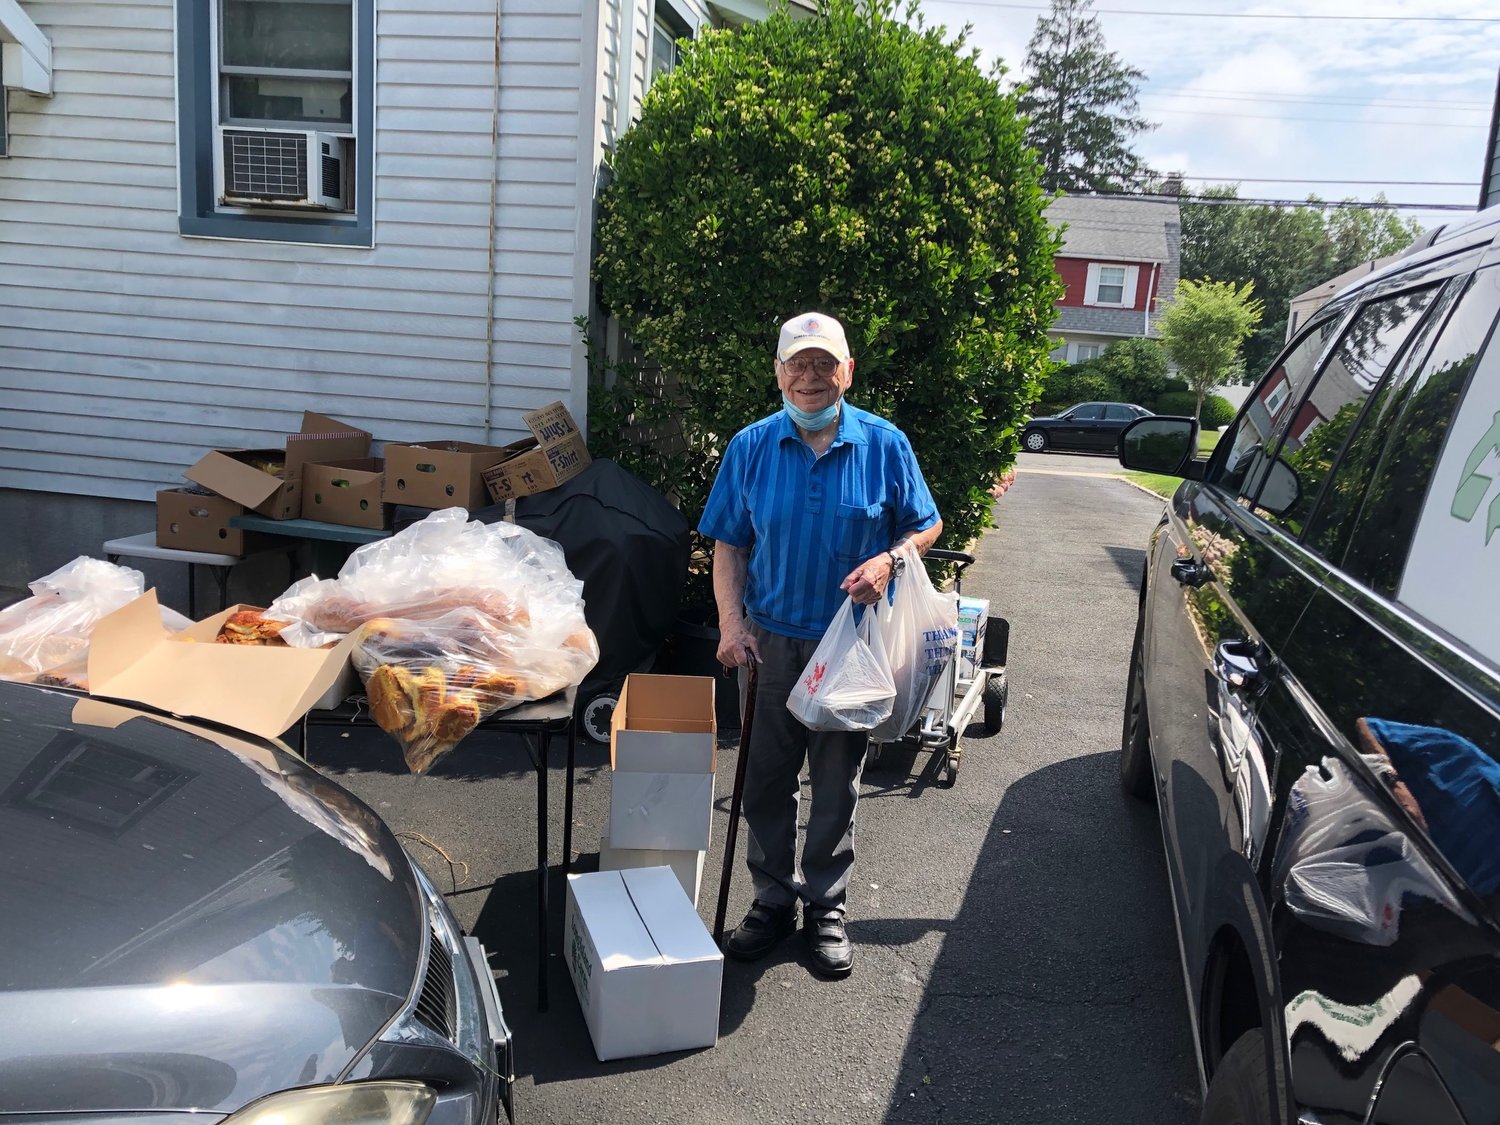 Korean War veteran hero Harry Sidor, 88, picked up food at the Veterans Farmers Market launched by Rock and Wrap It Up!’s Andy Parise Veterans Toolkit.